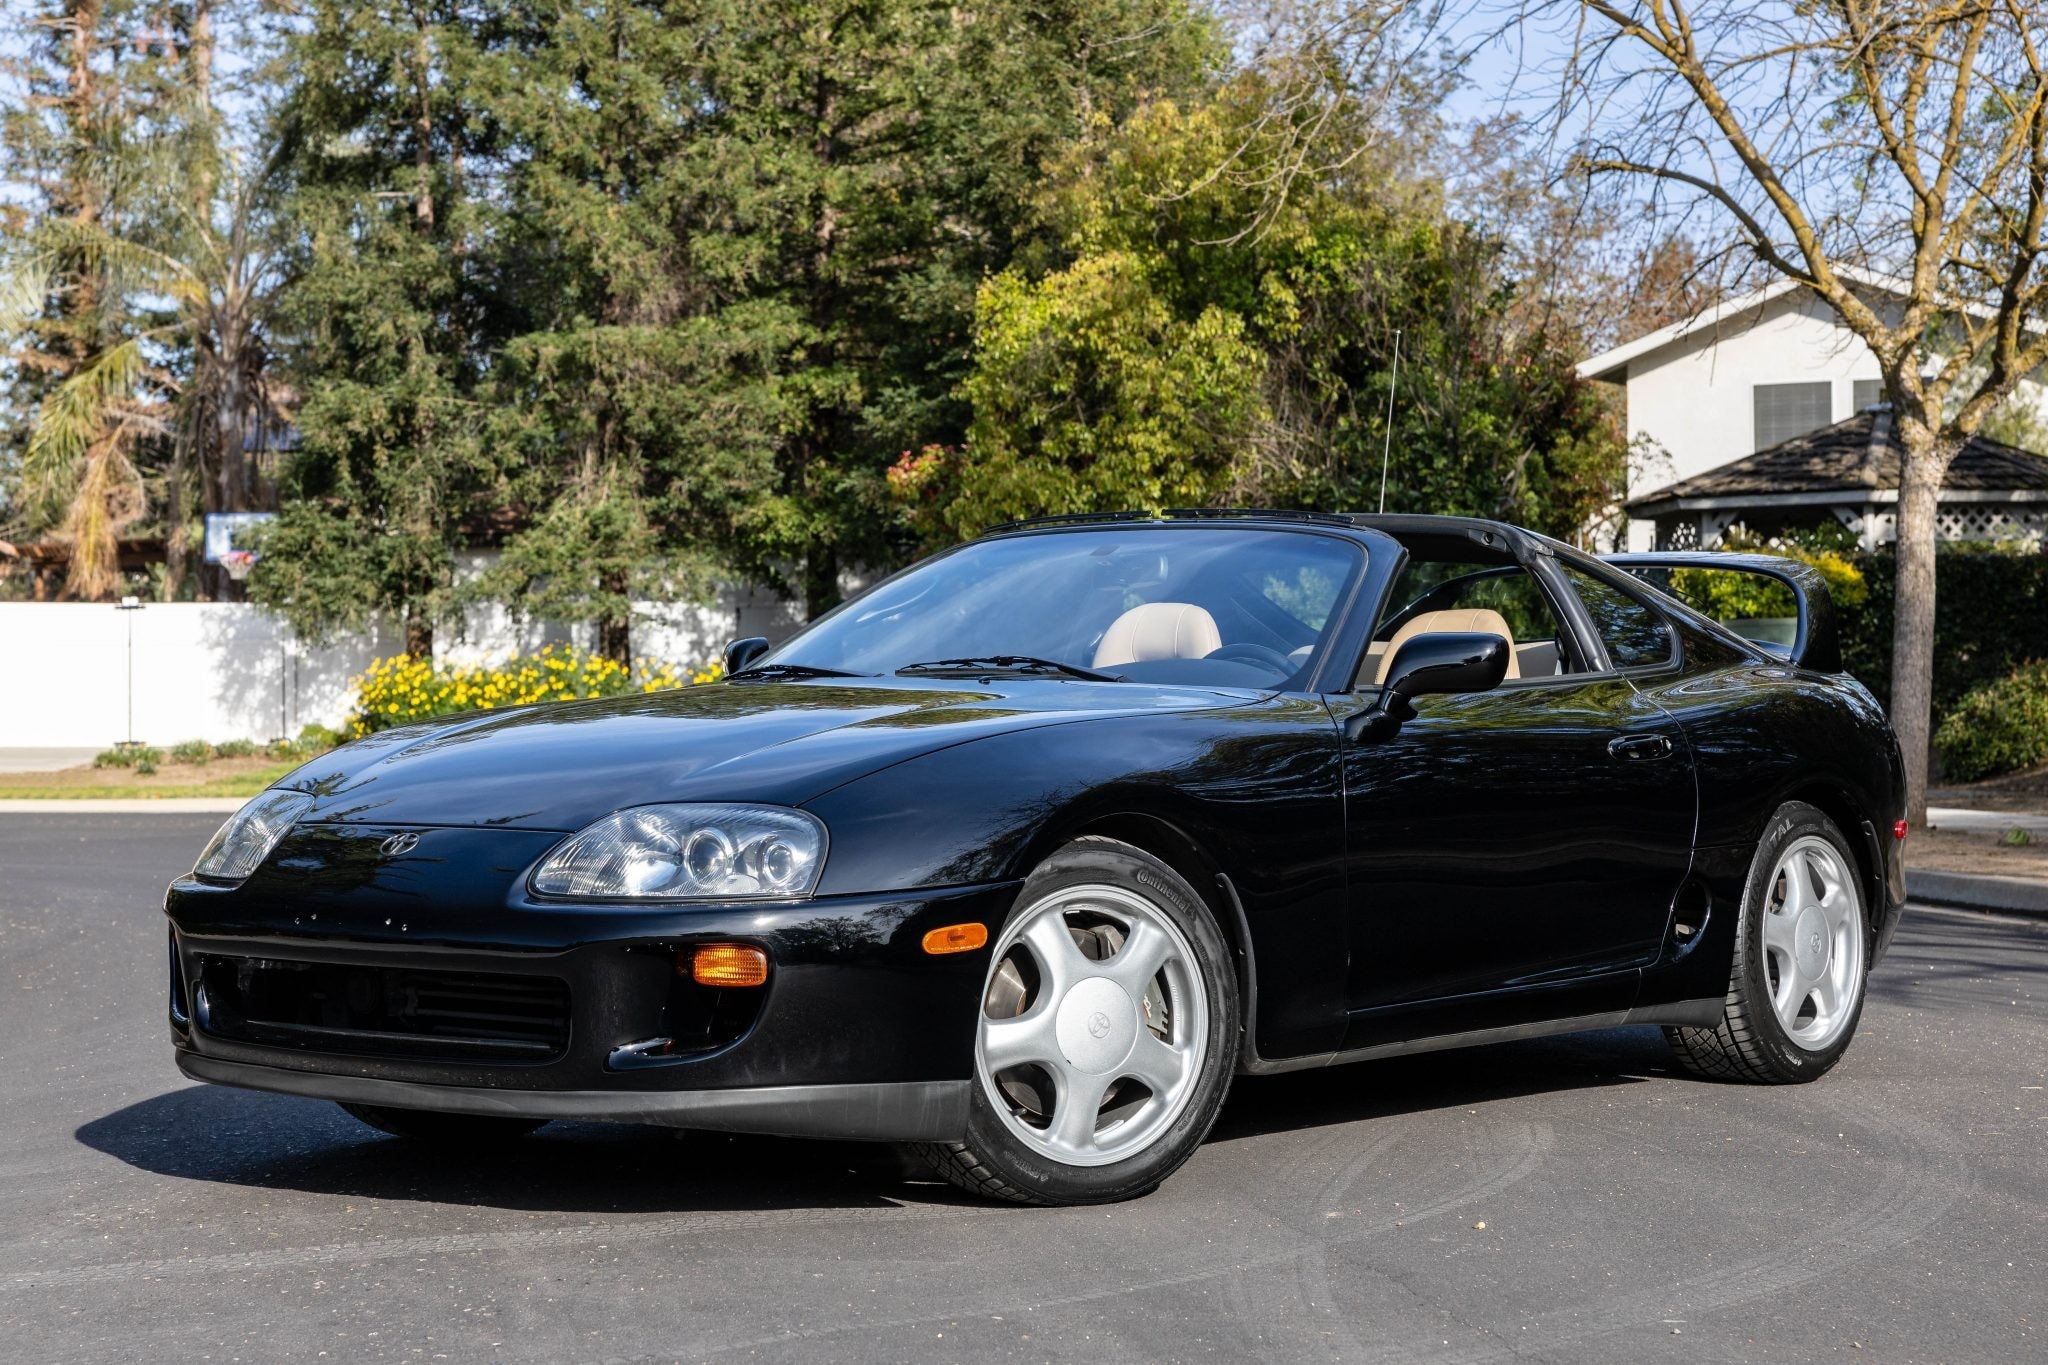 This 1994 Toyota Supra Turbo Is an Overrated JDM Holy Grail autoevolution